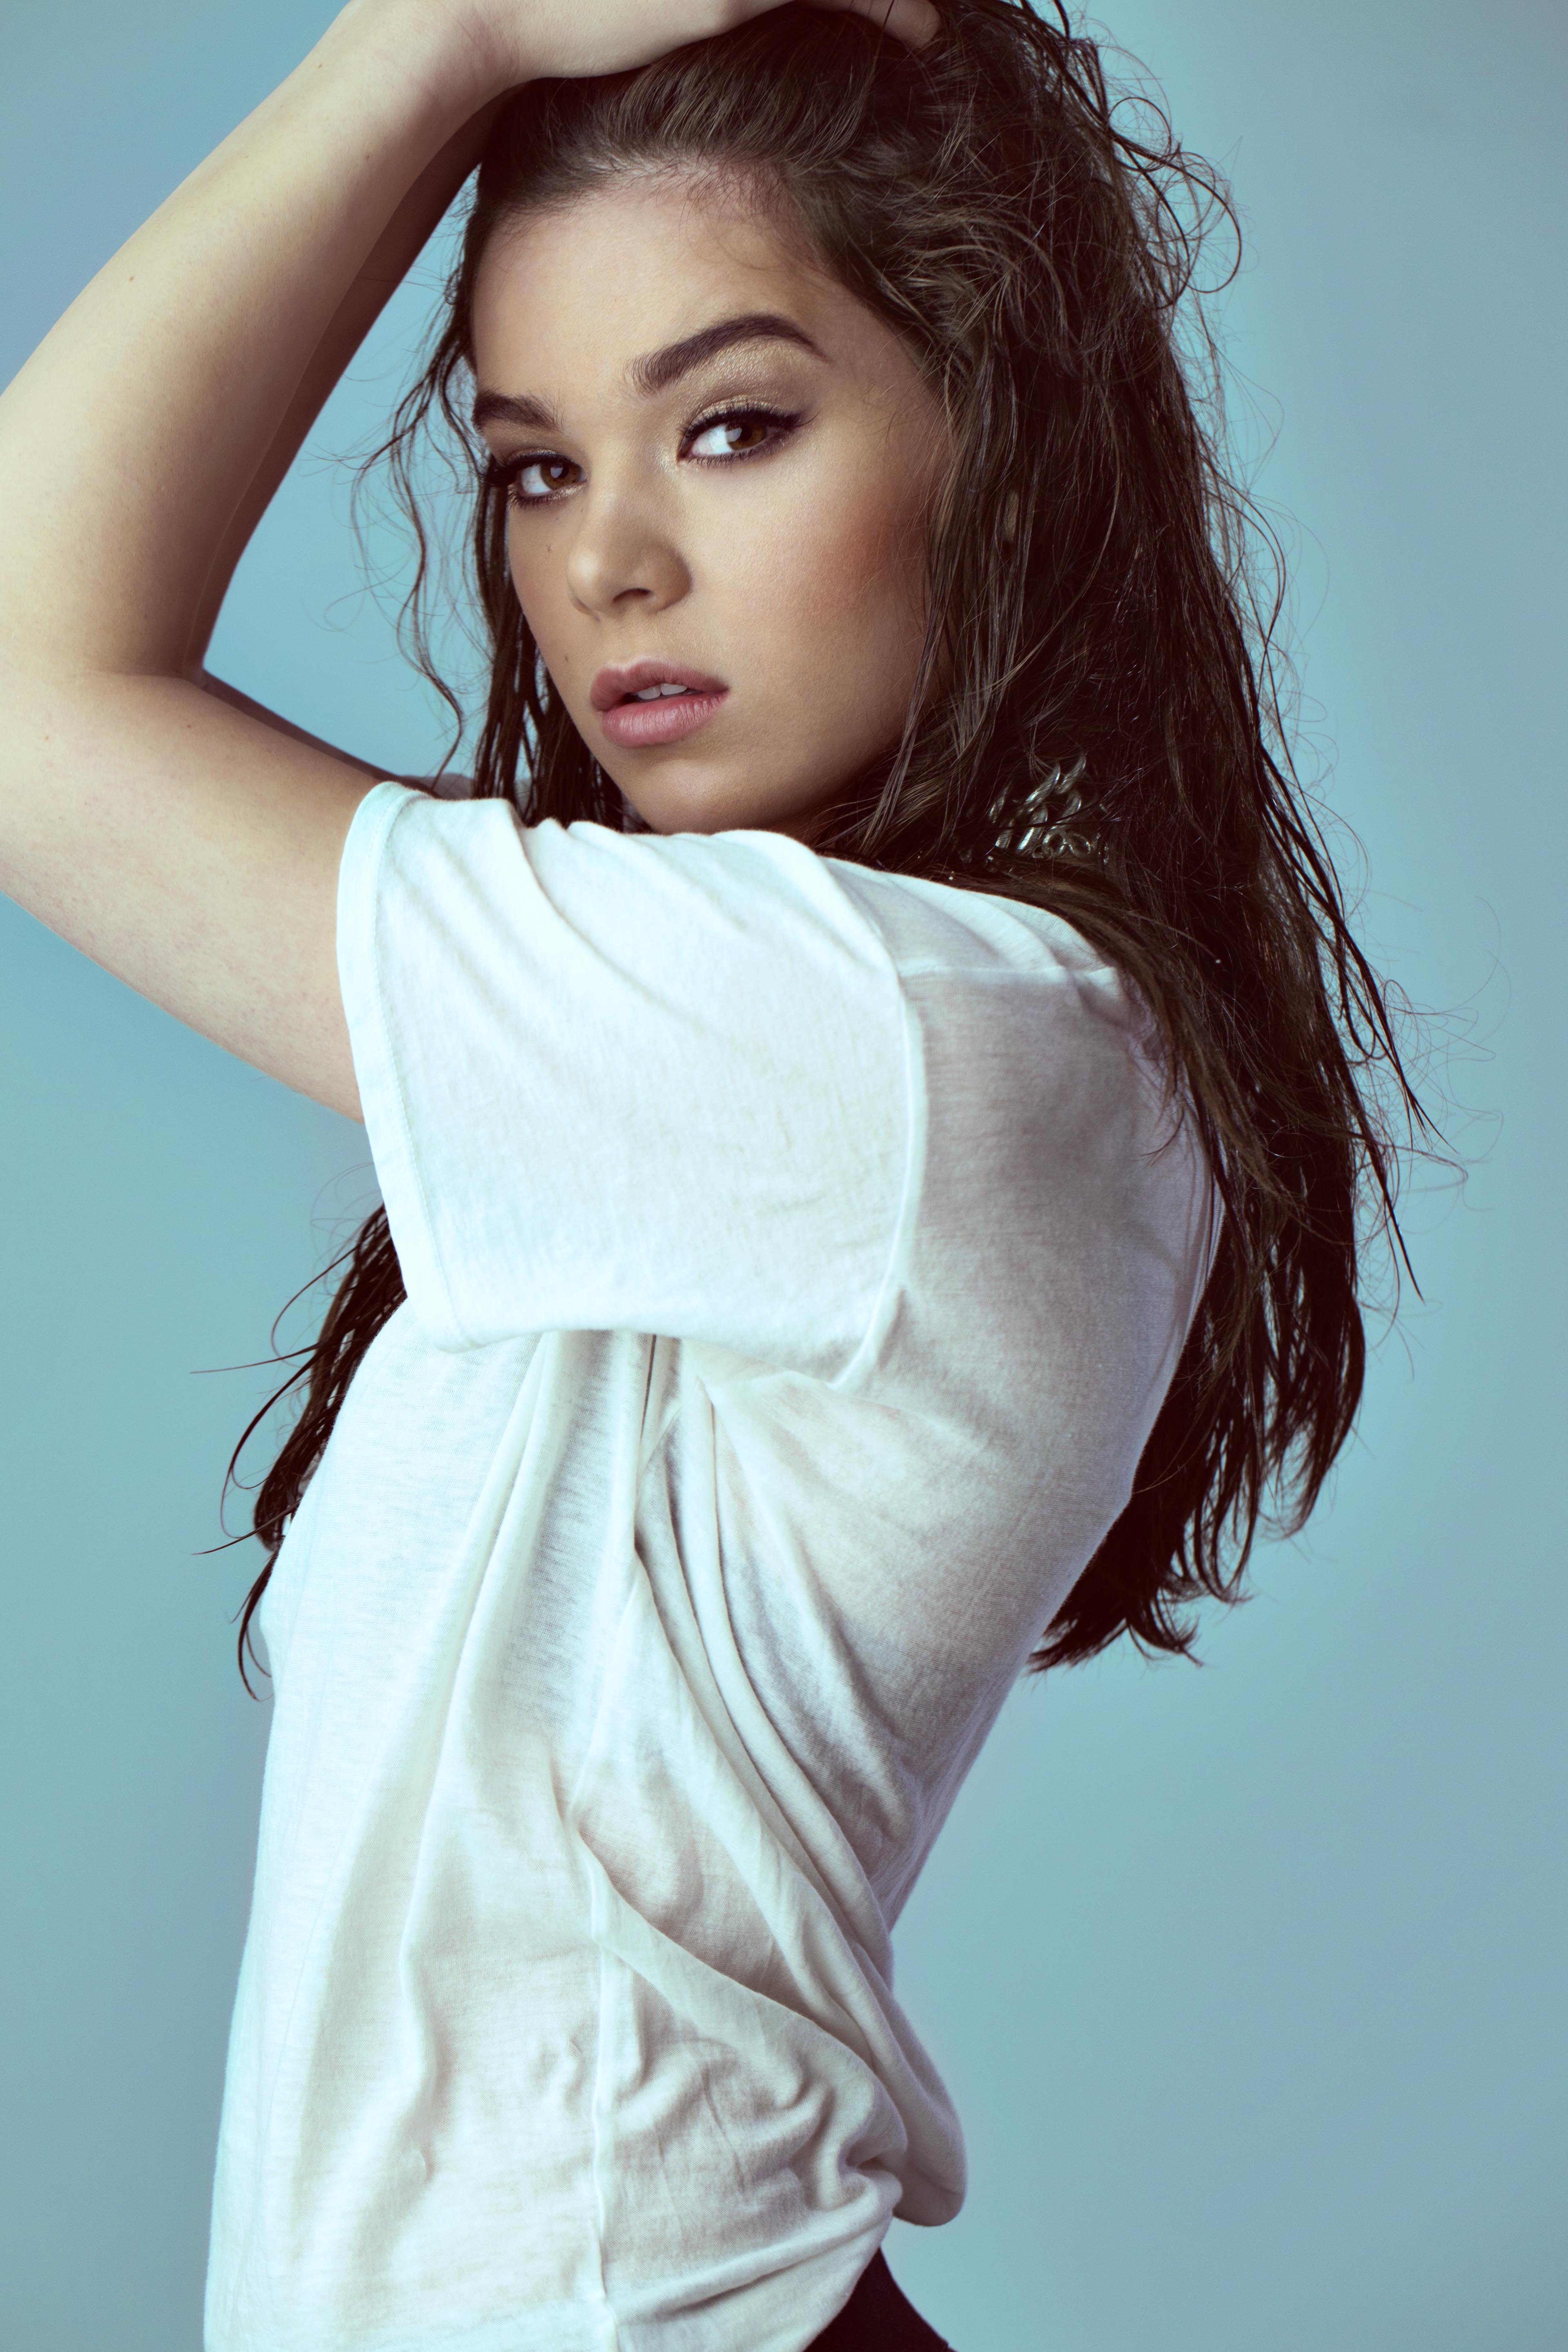 Global Star Hailee Steinfeld to Host and Perform at the 